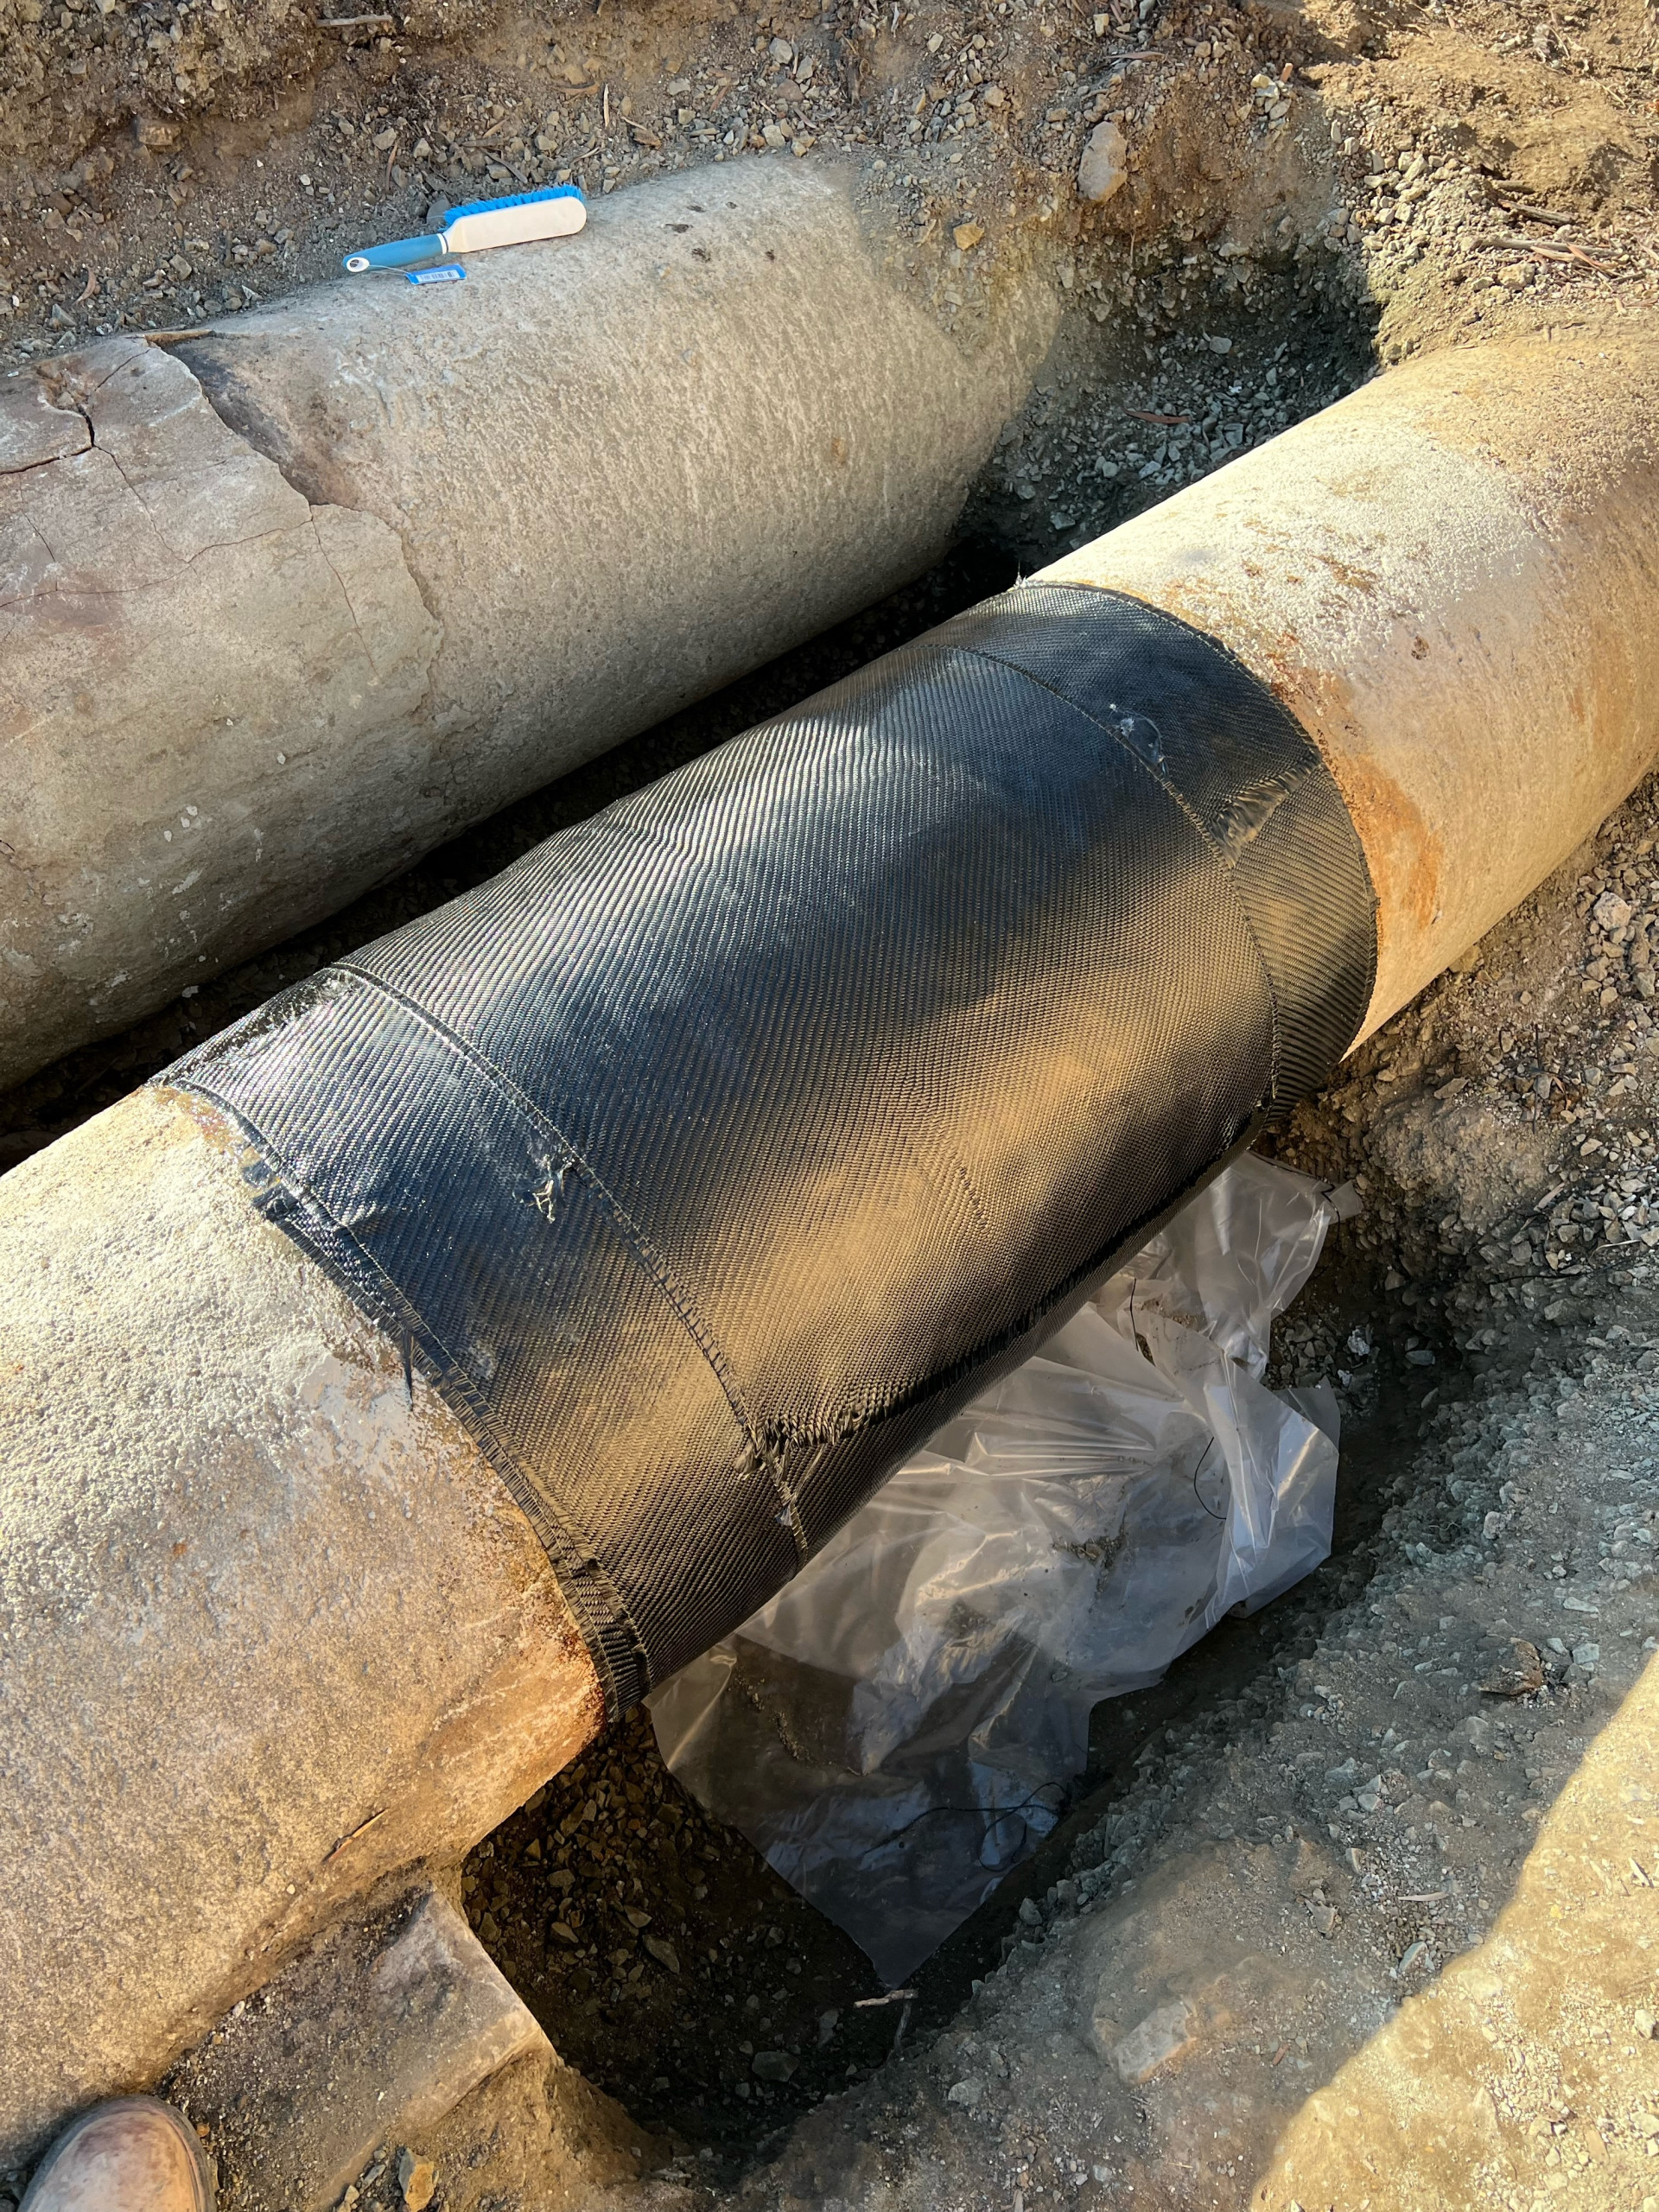 Composite pipe repair for waterwater treatment plant. Image of pipe wrapped in black composite wrap.